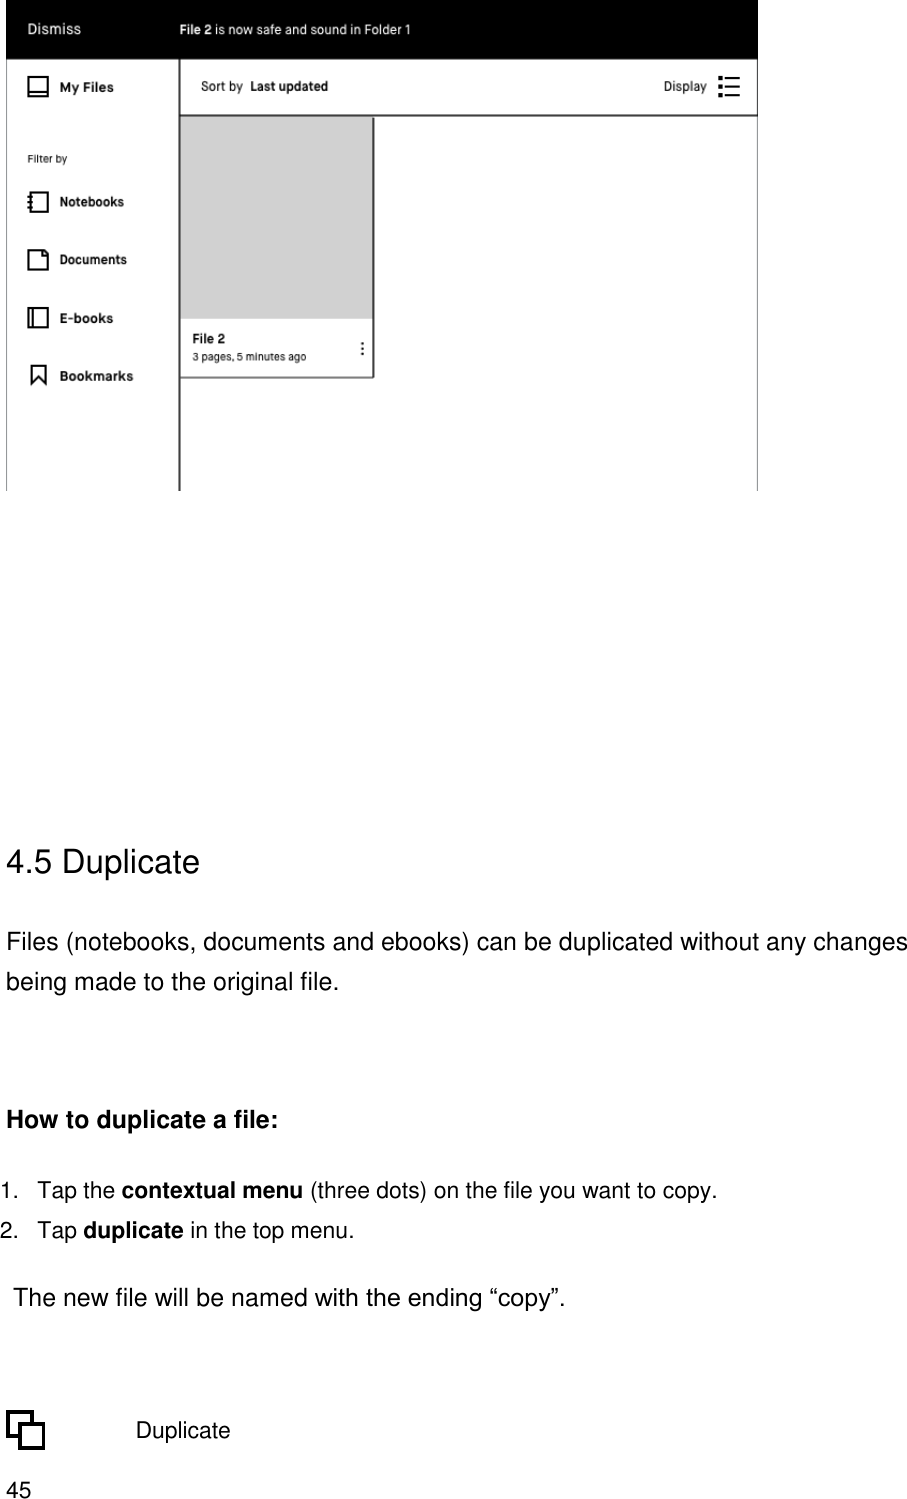 45        4.5 Duplicate  Files (notebooks, documents and ebooks) can be duplicated without any changes being made to the original file.     How to duplicate a file: 1.  Tap the contextual menu (three dots) on the file you want to copy. 2. Tap duplicate in the top menu.  The new file will be named with the ending “copy”.            Duplicate 